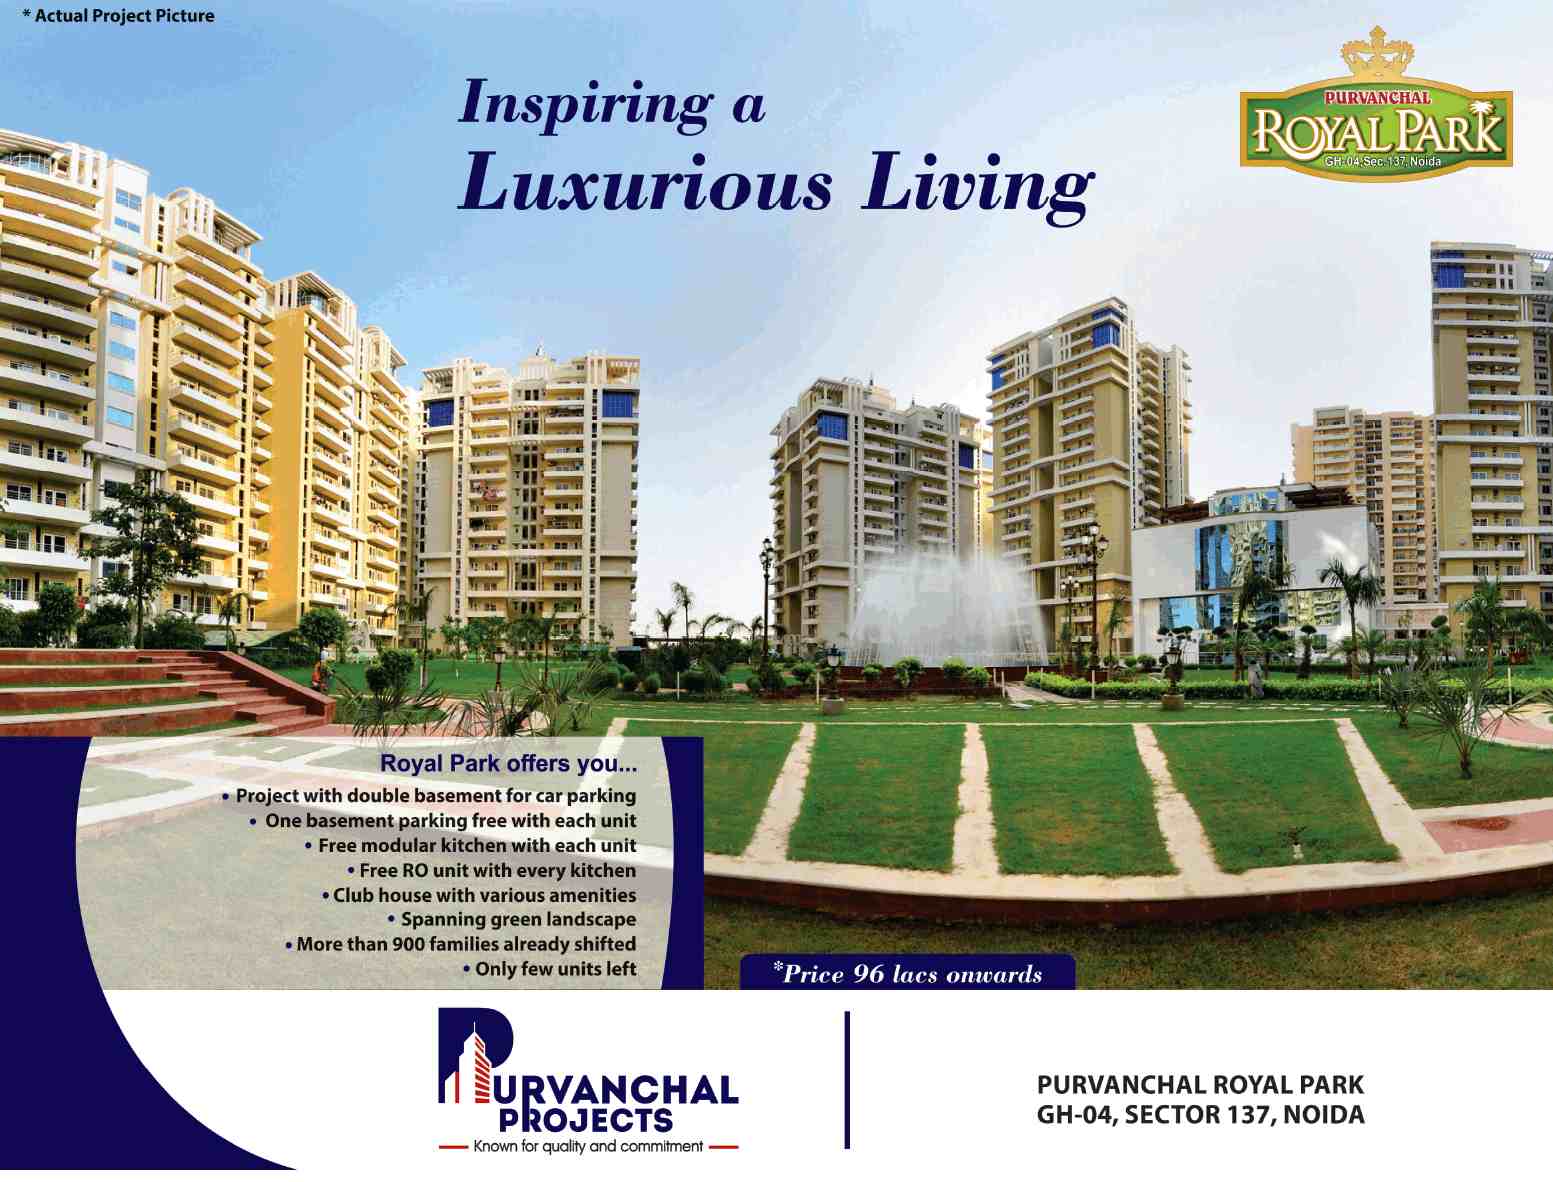 Purvanchal Royal Park is inspiring a luxurious living in Noida